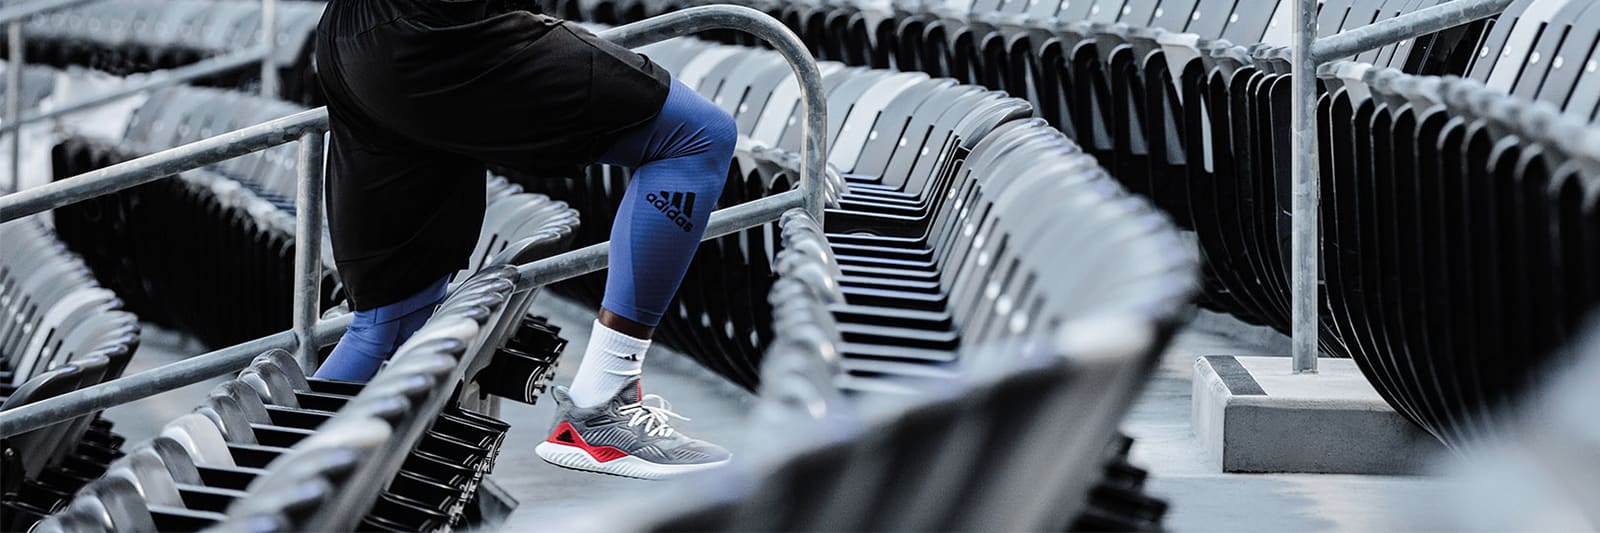 Running Track Pants - Buy Running Track Pants online in India